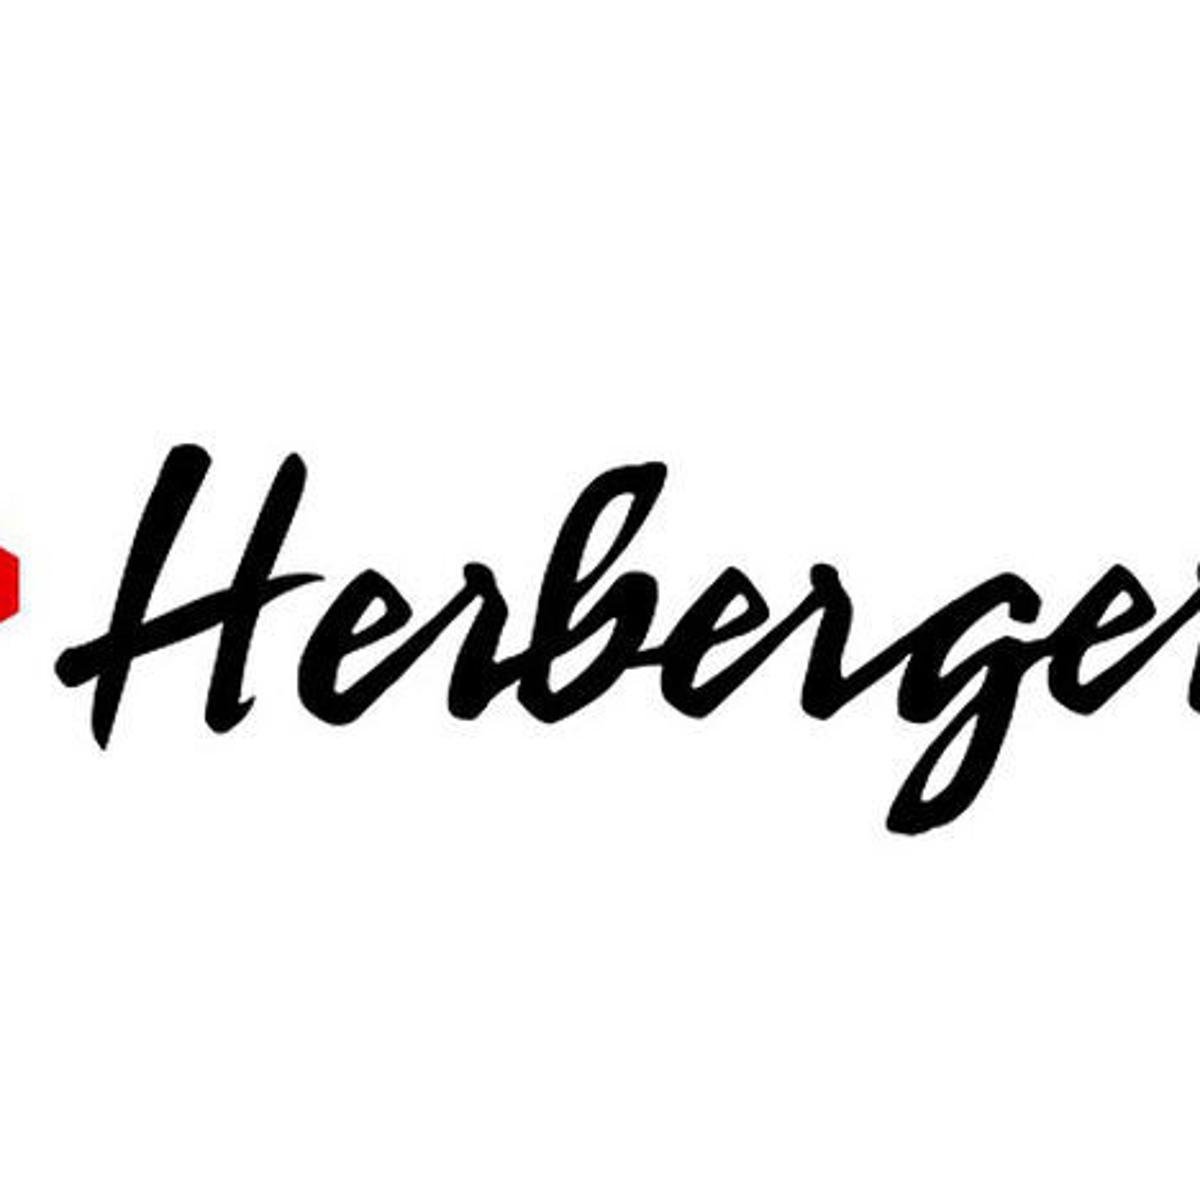 Herberger's Logo - Herberger's stores to close in Montana